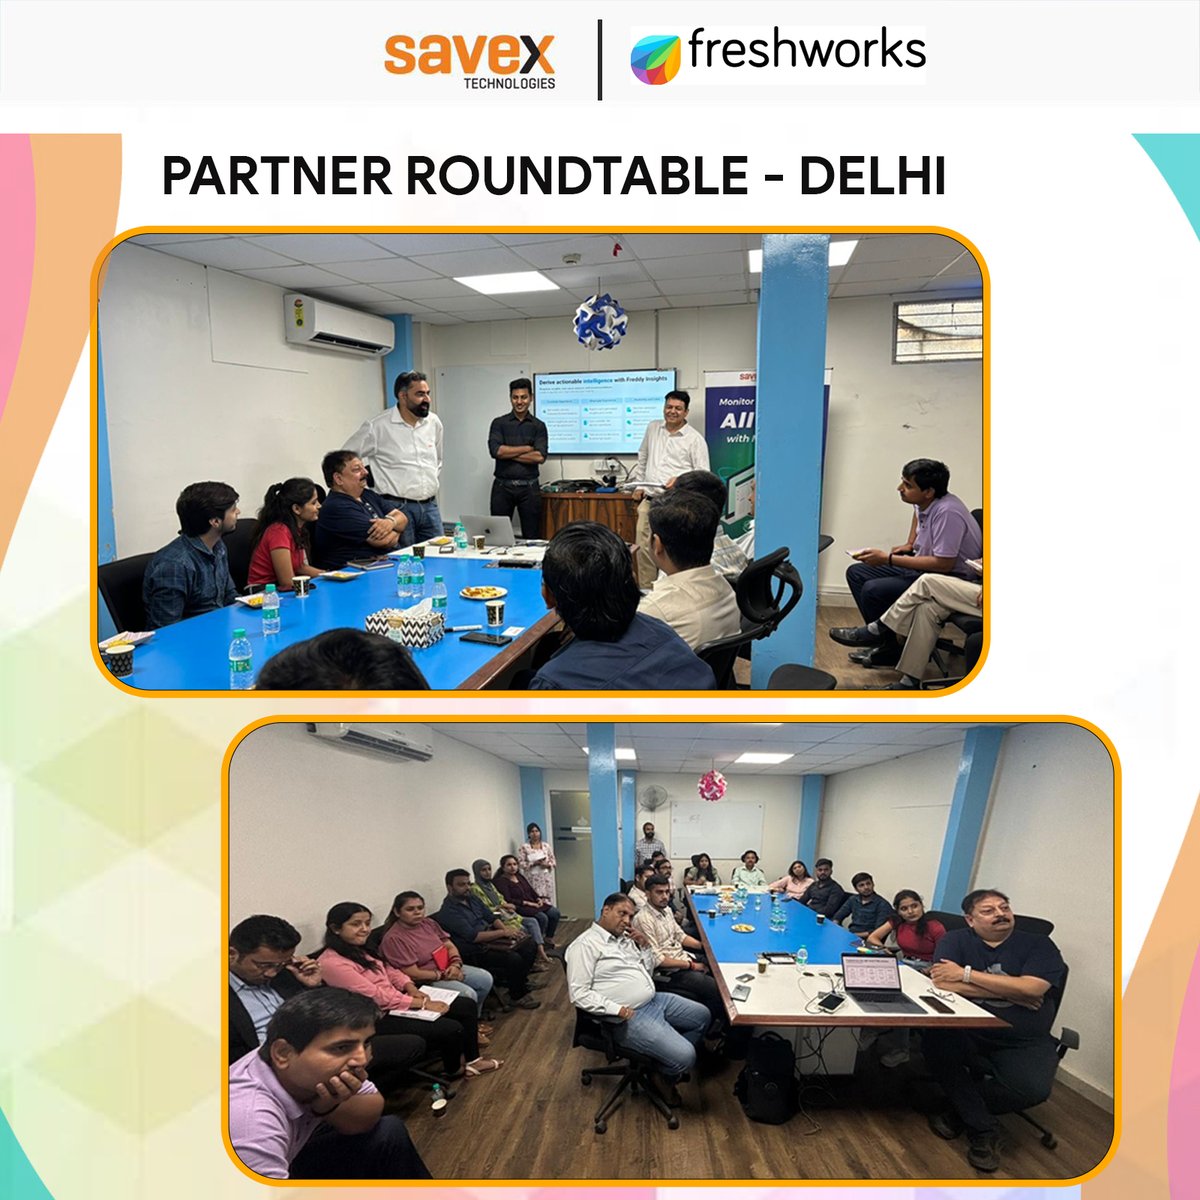 Our recent Delhi Partner Roundtable on Freshworks Solutions delved into go-to-market strategies, growth opportunities, and customer challenges. Thanks to all partners for their invaluable engagement!

#savex #freshworks #freshworkspartner #Freshdesk #itsm #itandsoftware